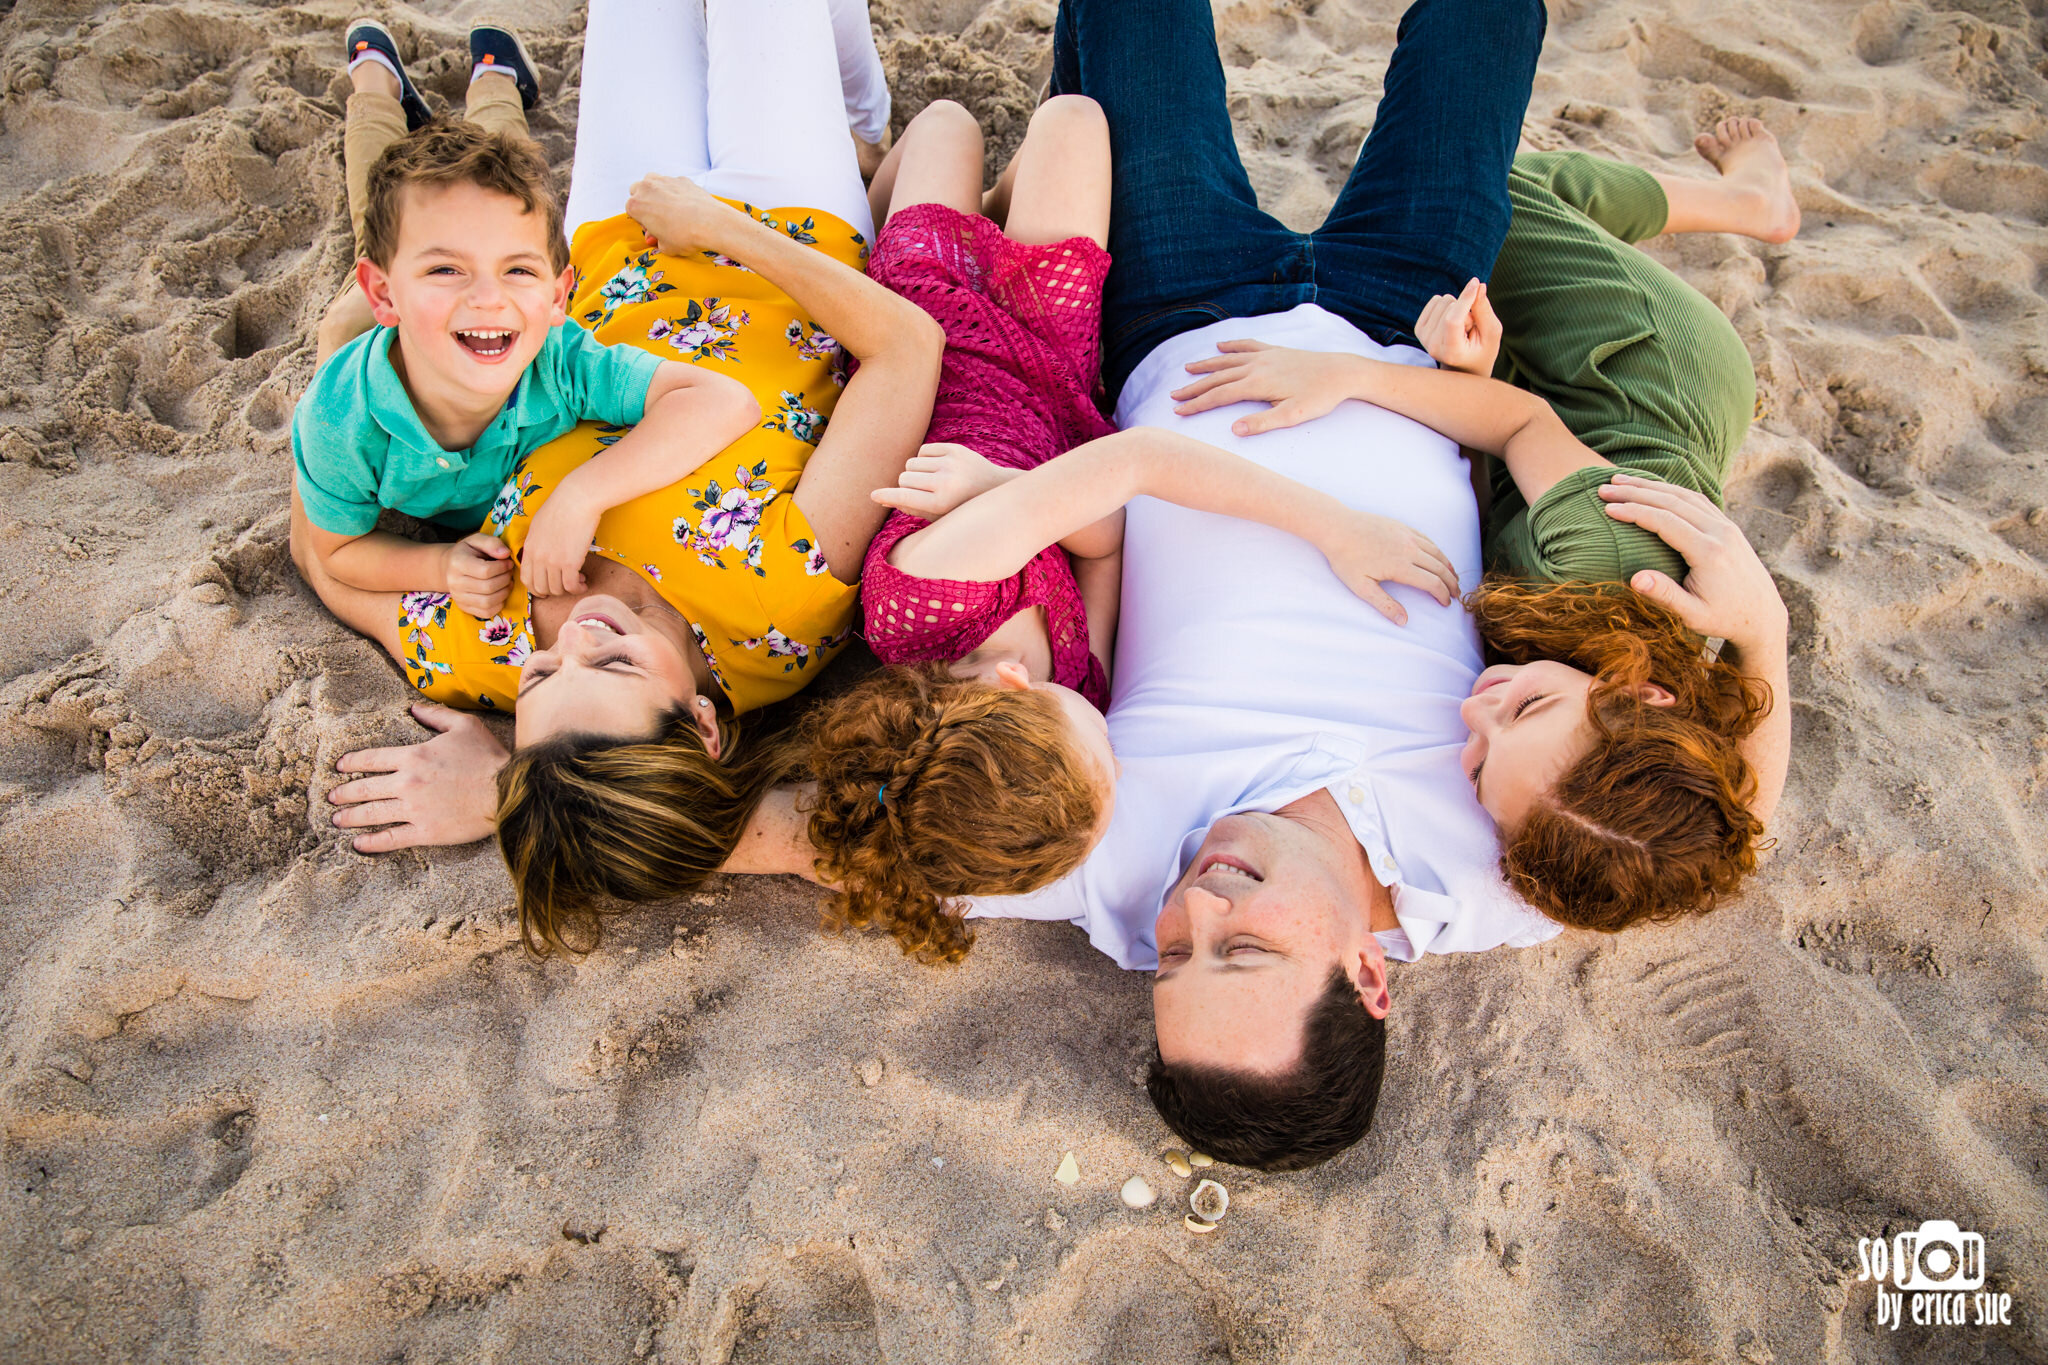 10-so-you-by-erica-sue-lifestyle-family-photographer-lauderdale-by-the-sea-sloan-6086.JPG